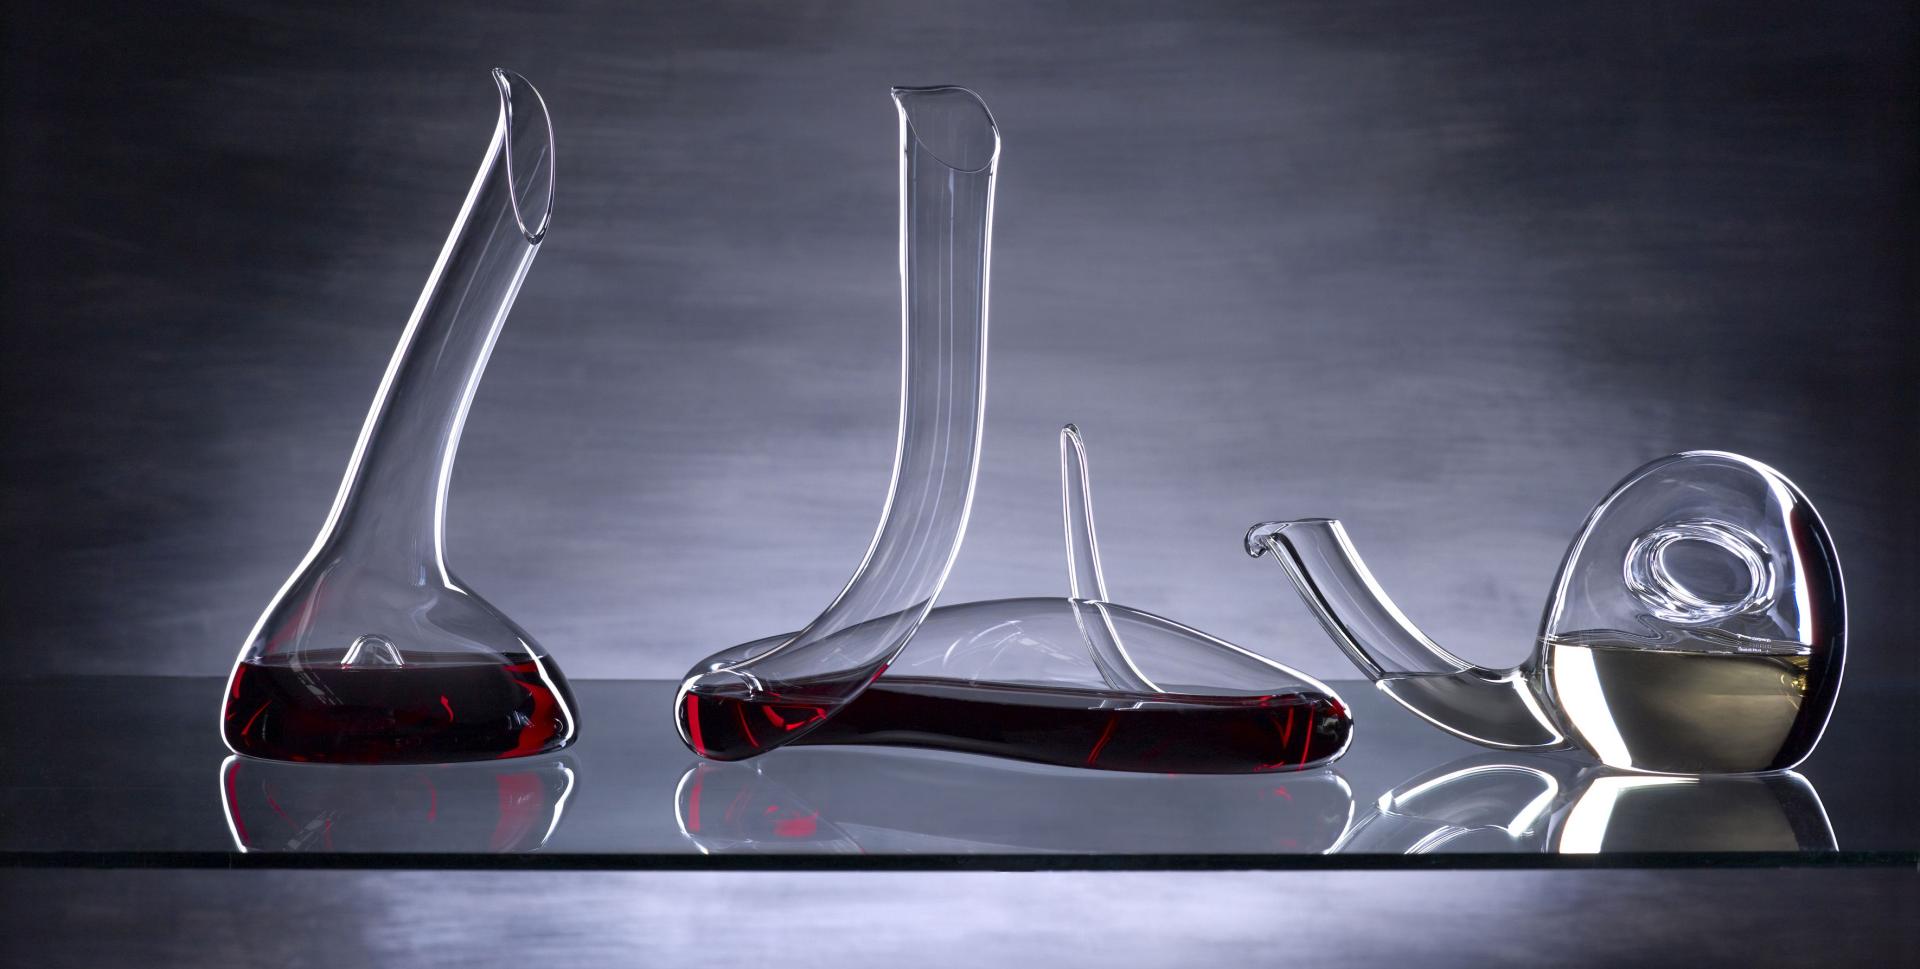 Gifts for wine lovers